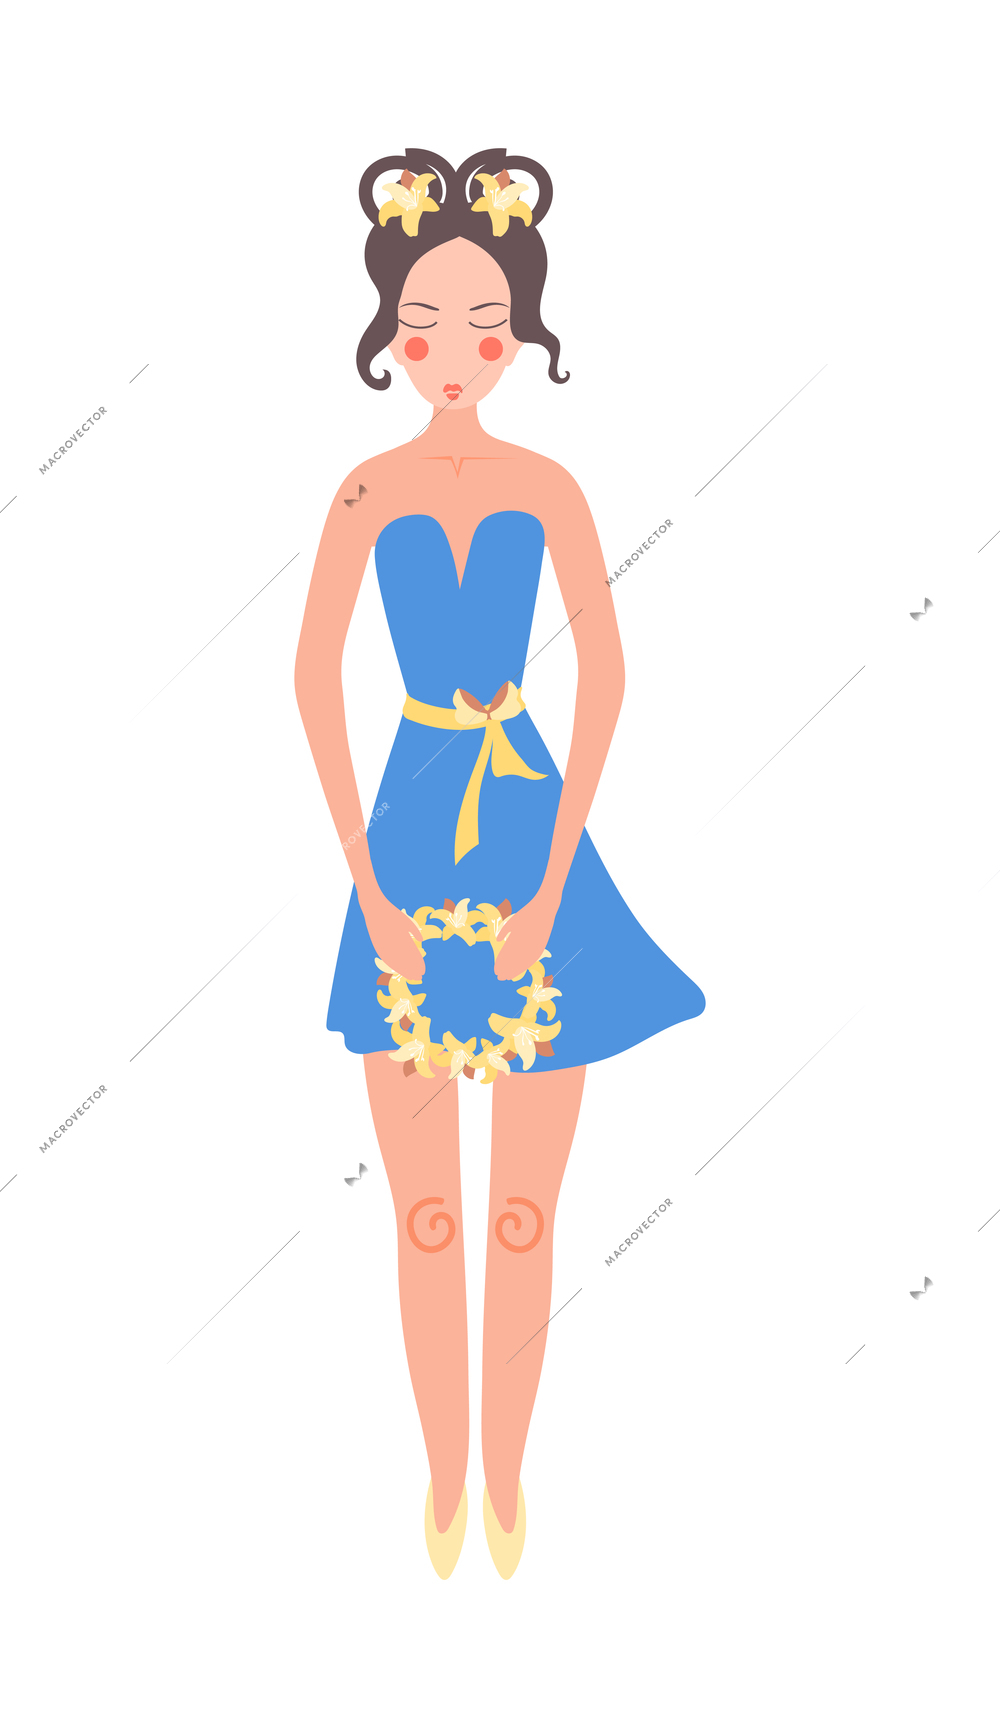 Flower girls flat composition with character of tiny woman holding floral wreath on blank background vector illustration